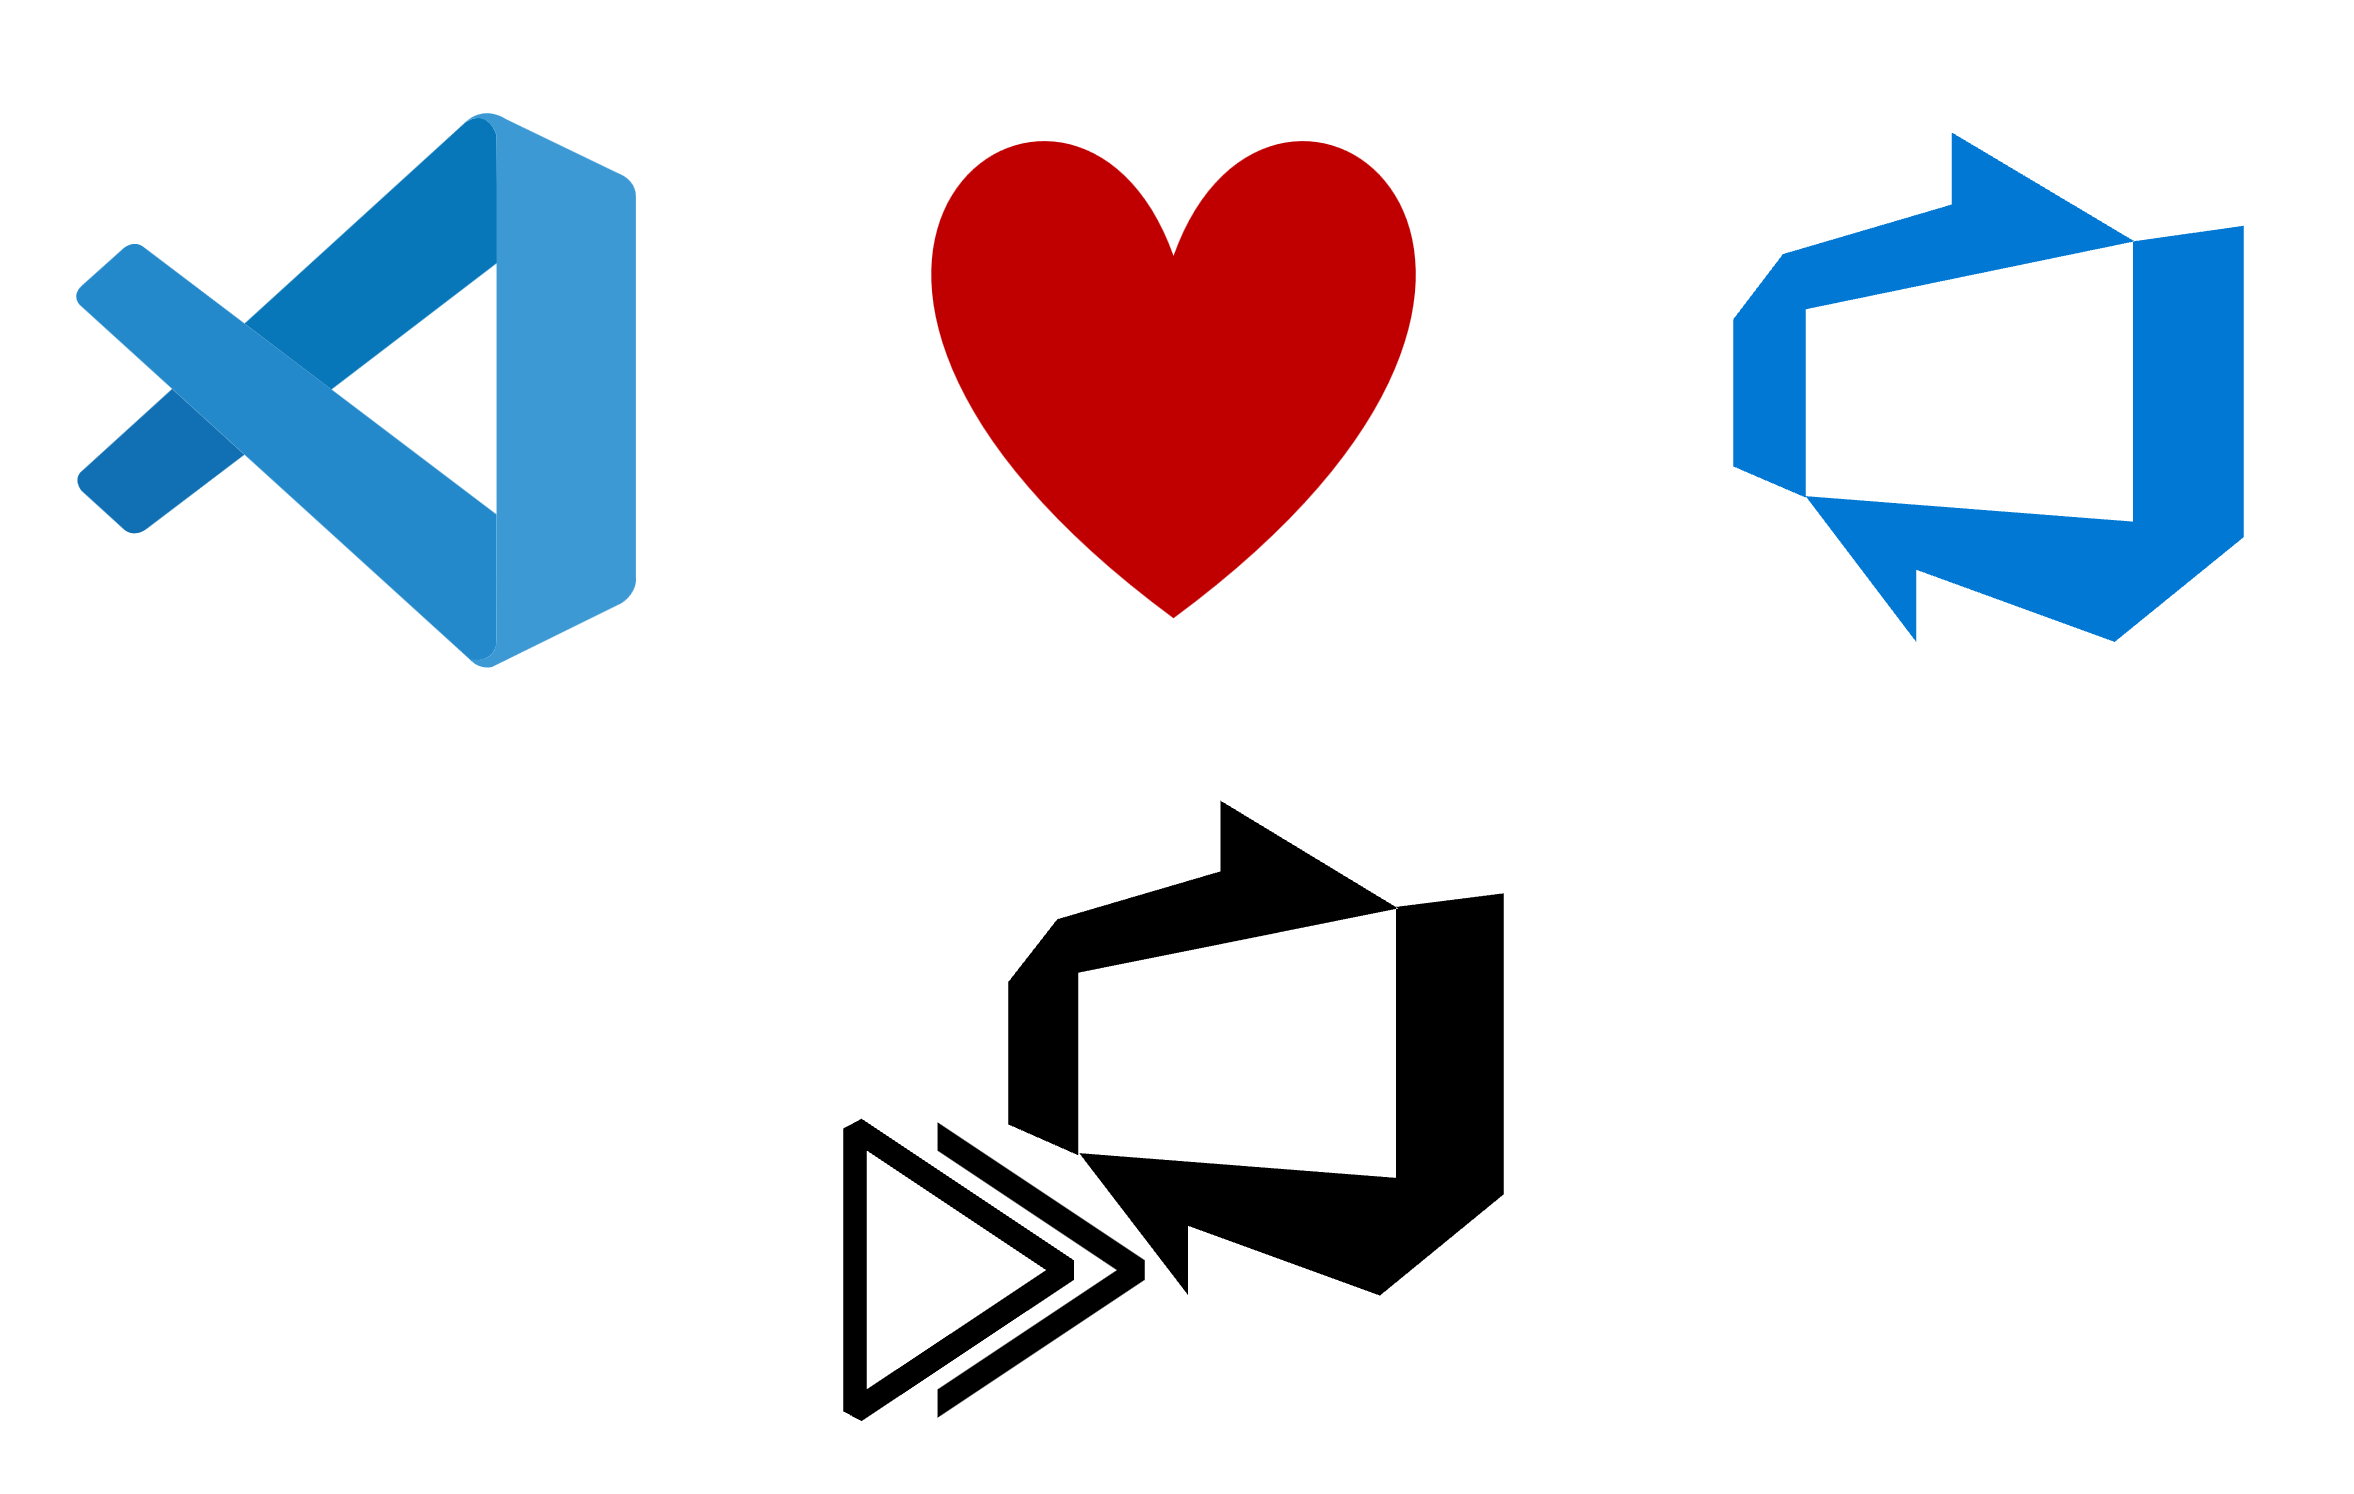 Azure DevOps Simplify - the community extension to work more efficiently with Azure DevOps from VS Code